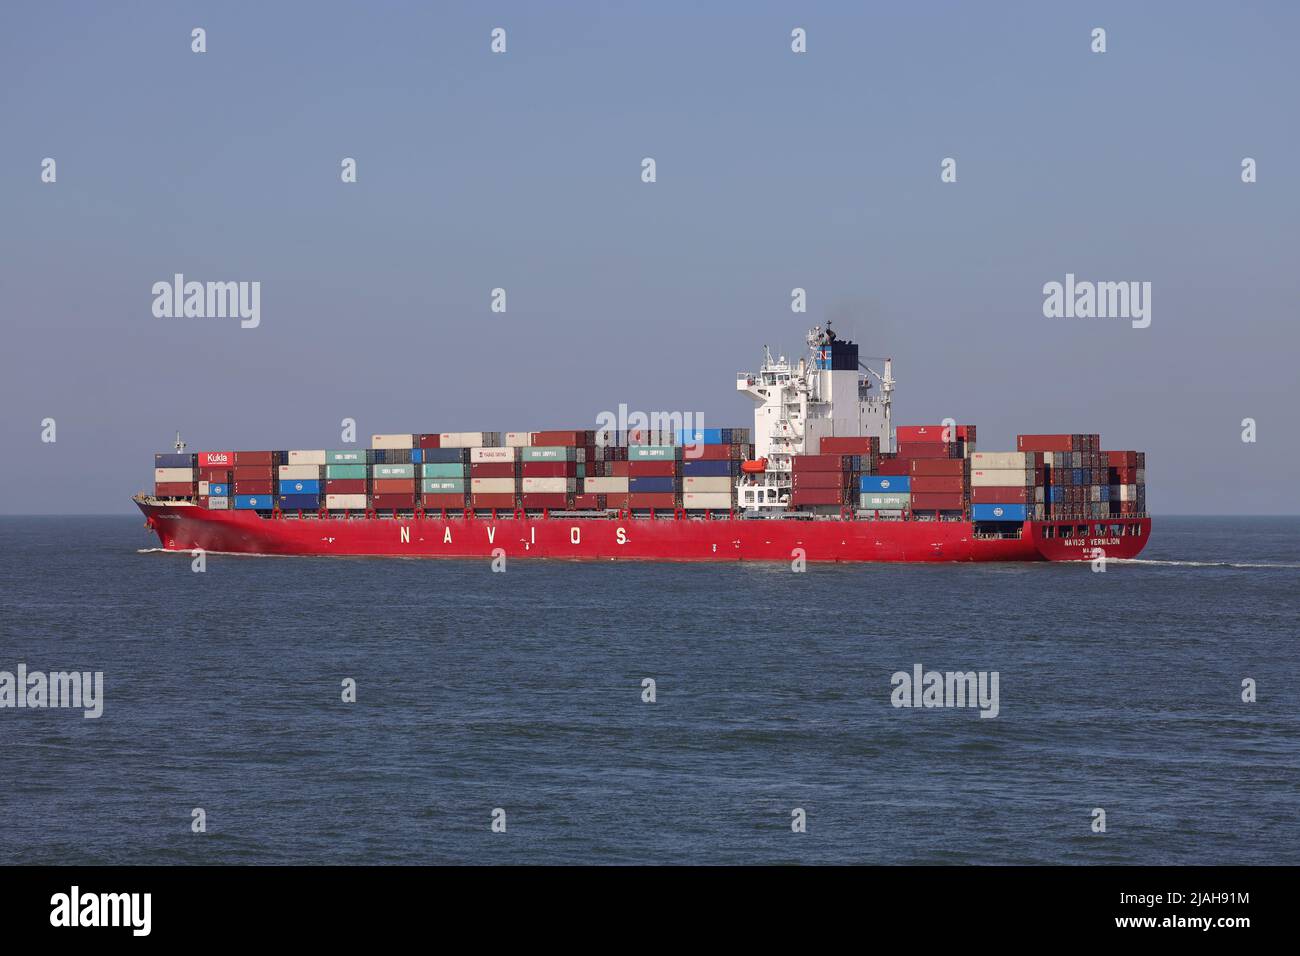 The container ship Navios Vermilion leaves the port of Rotterdam on March 18, 2022. Stock Photo